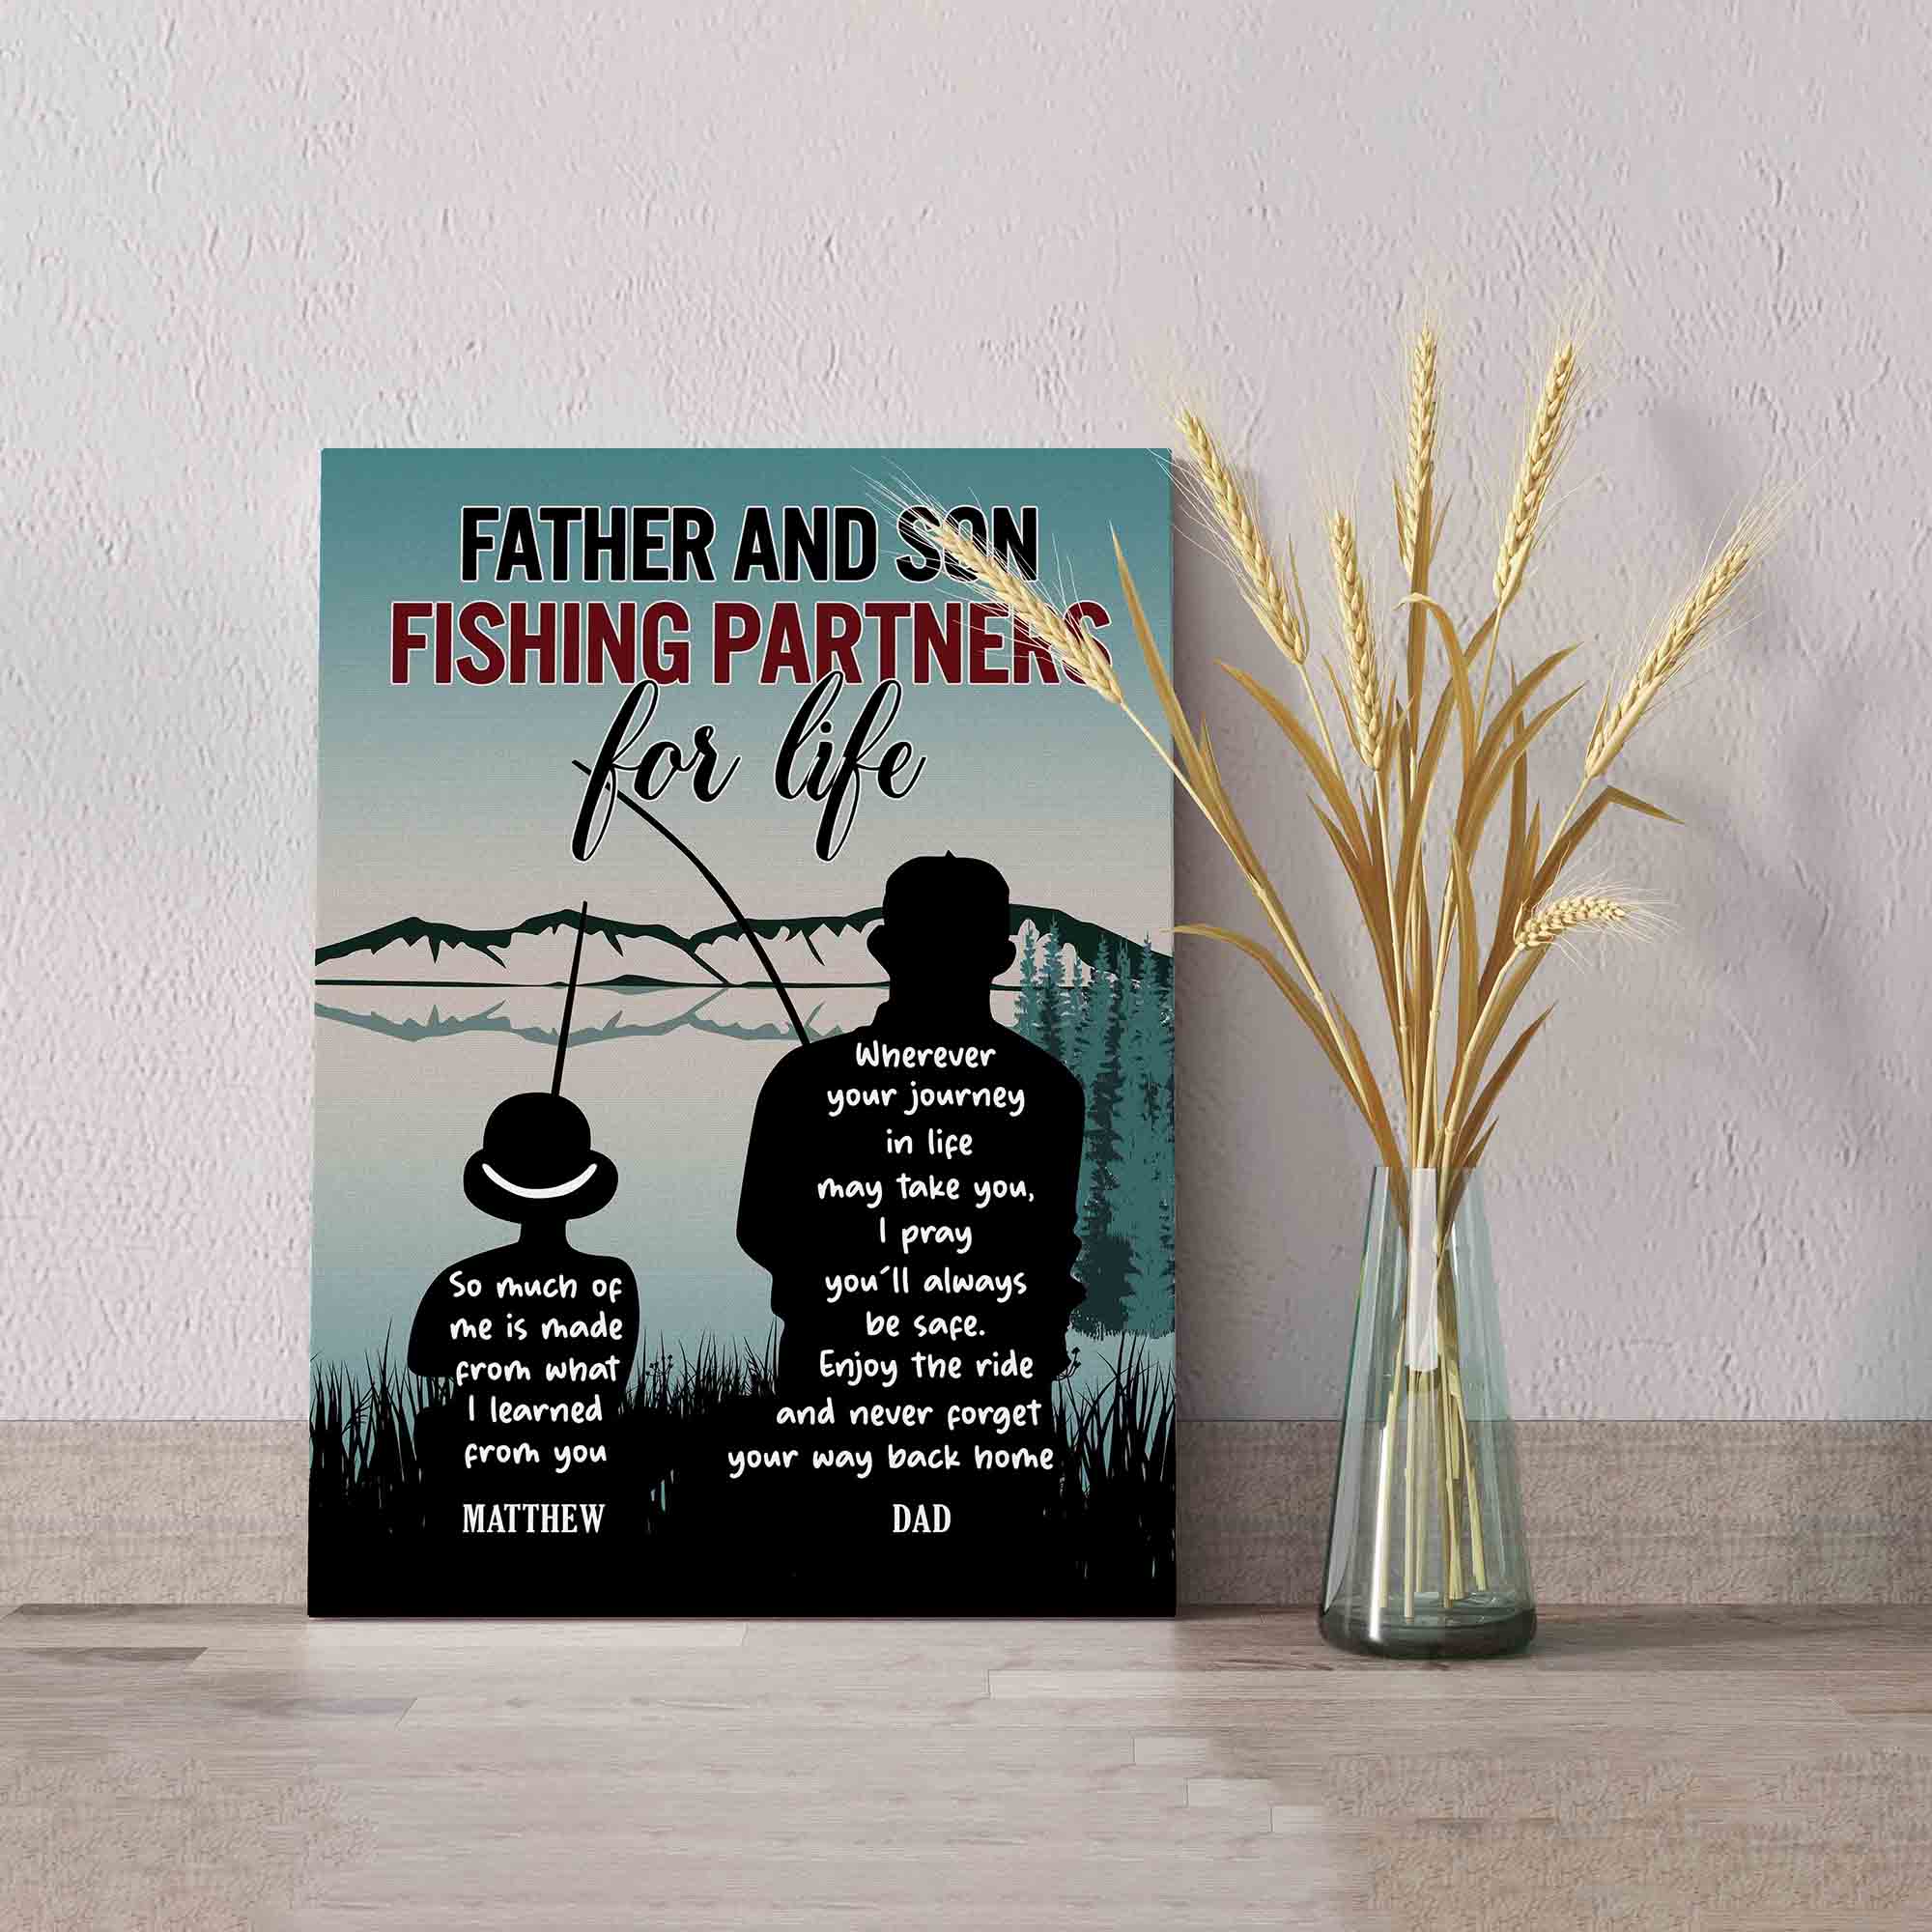 Father And Son Fishing Partners For Life Canvas, Fishing Canvas, Family Canvas, Canvas For Gift